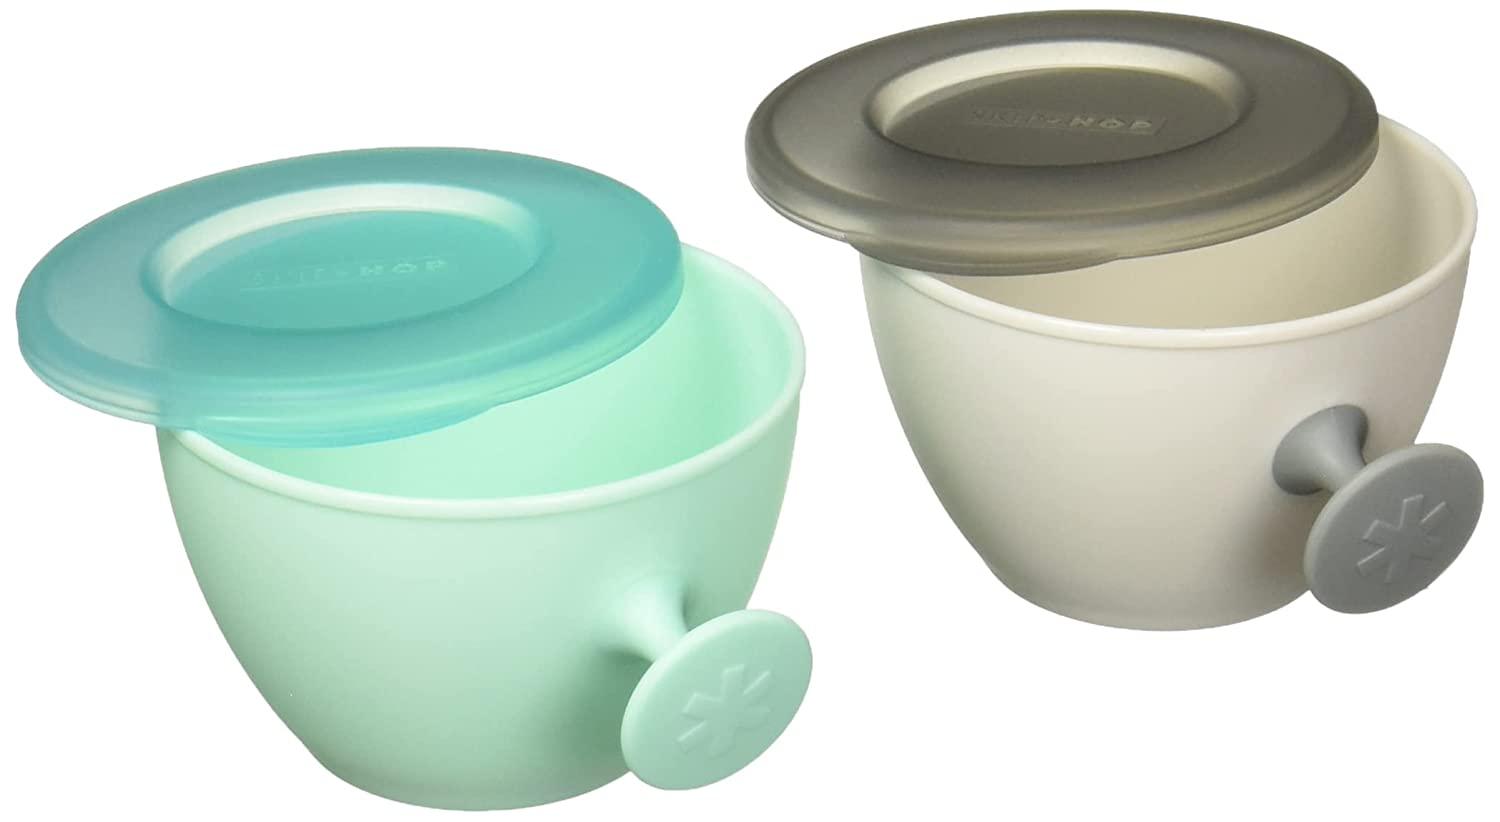 Skip Hop Easy-Feed Mealtime Set Teal-Grey - Weaning Accessory For Ages 0-3 Years